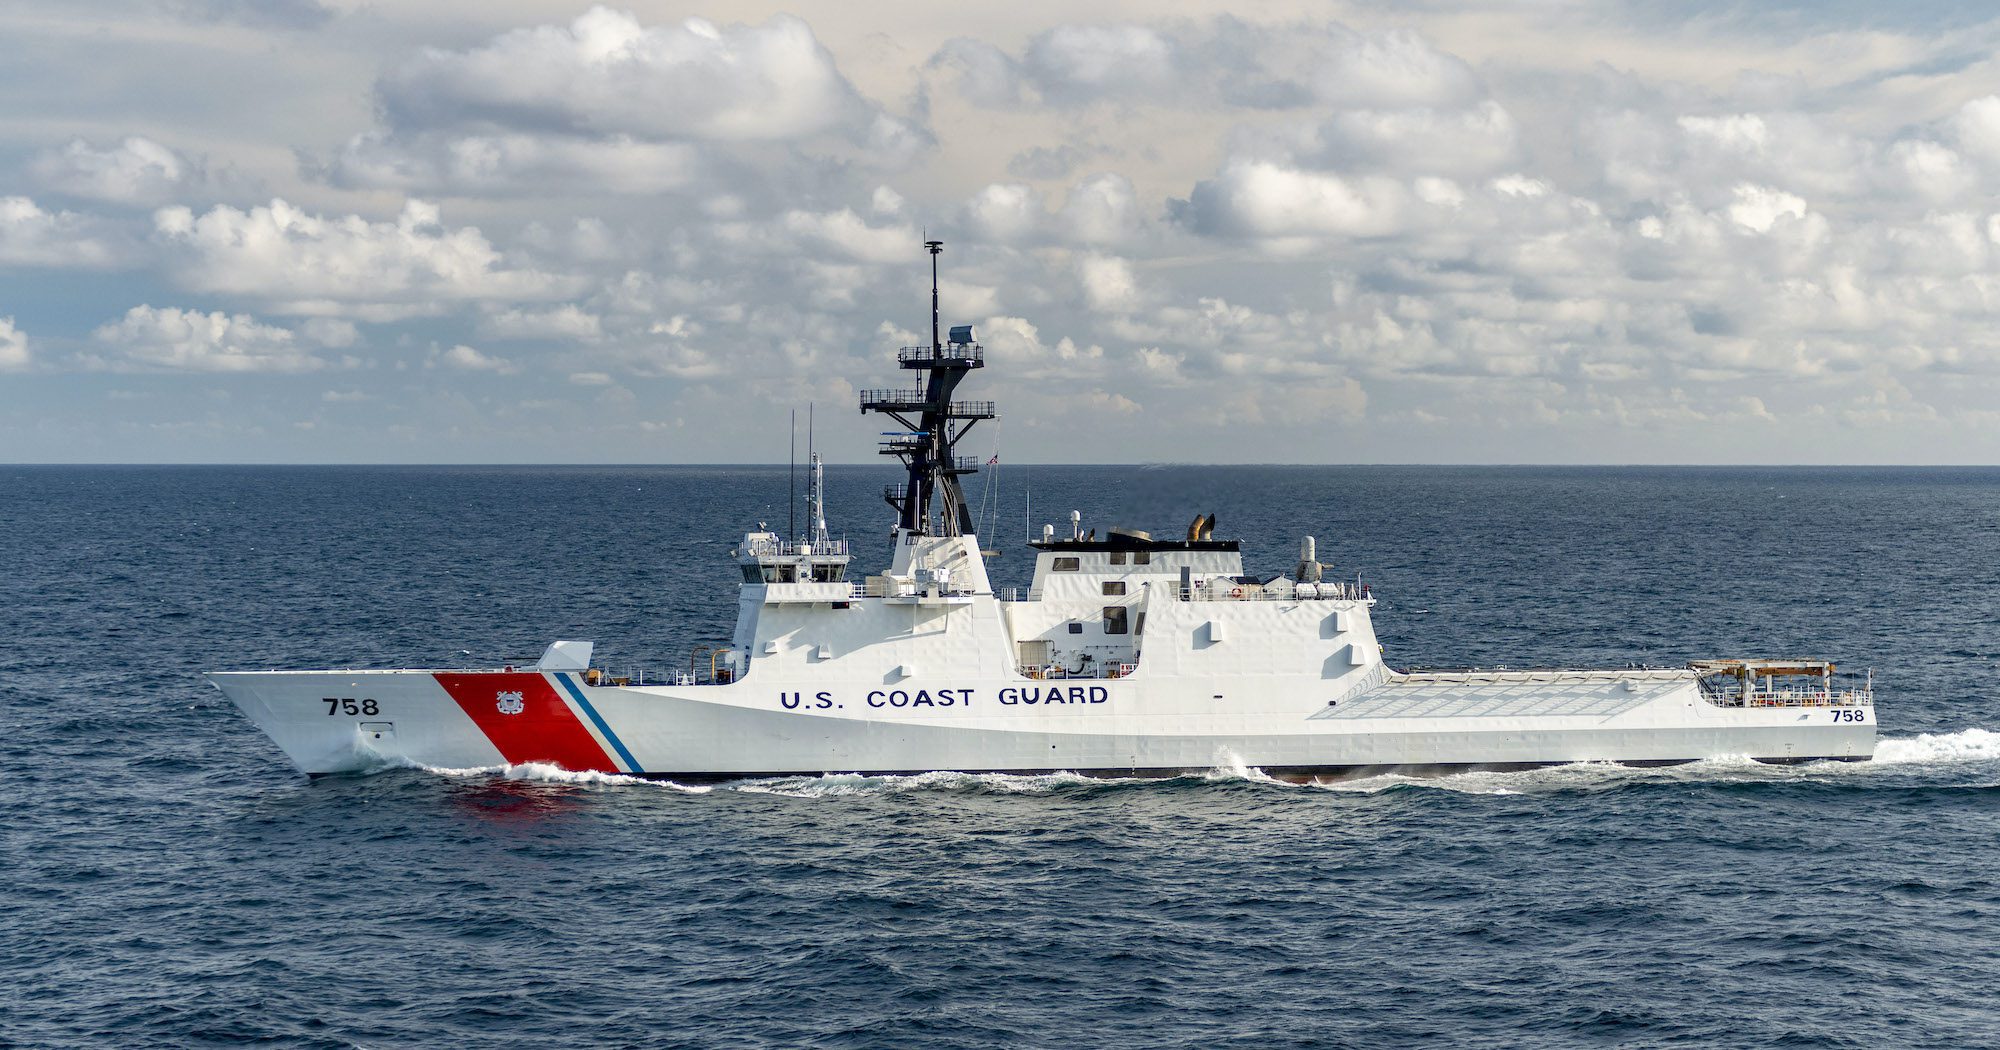 U.S. Coast Guard’s New National Security Cutter to Patrol South Atlantic for Illegal Fishing